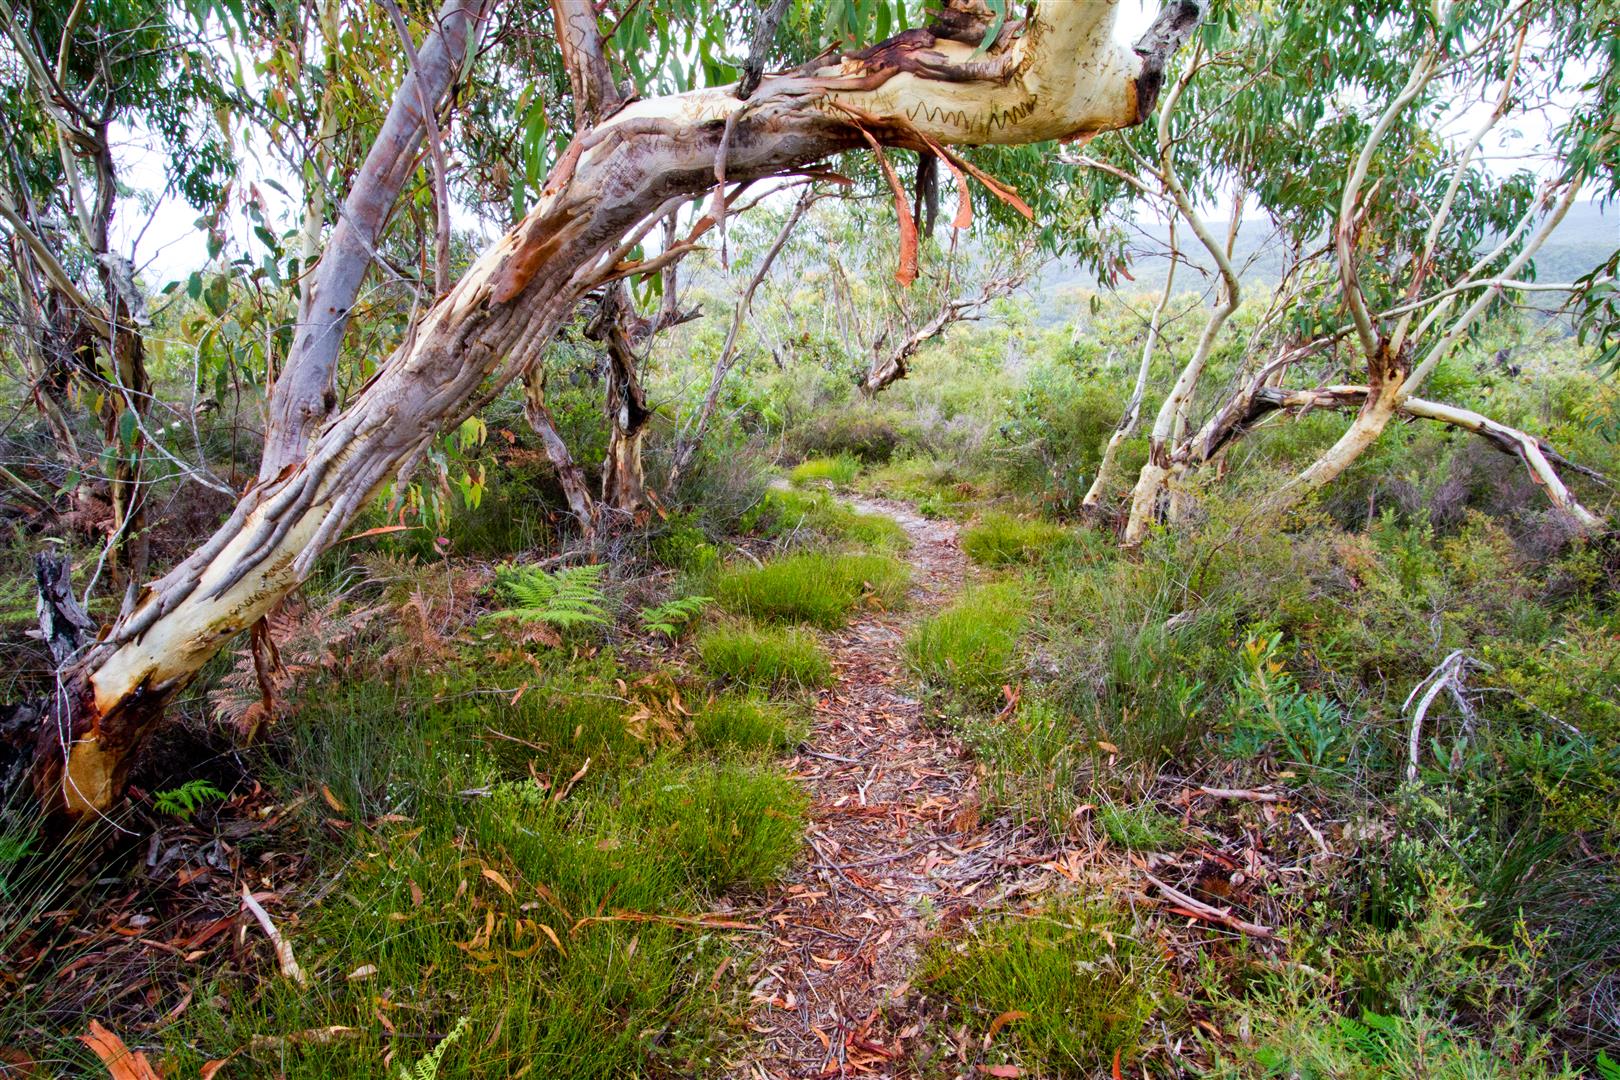 The path to Neembeeba Lookout, Karboora section of the island's national park.